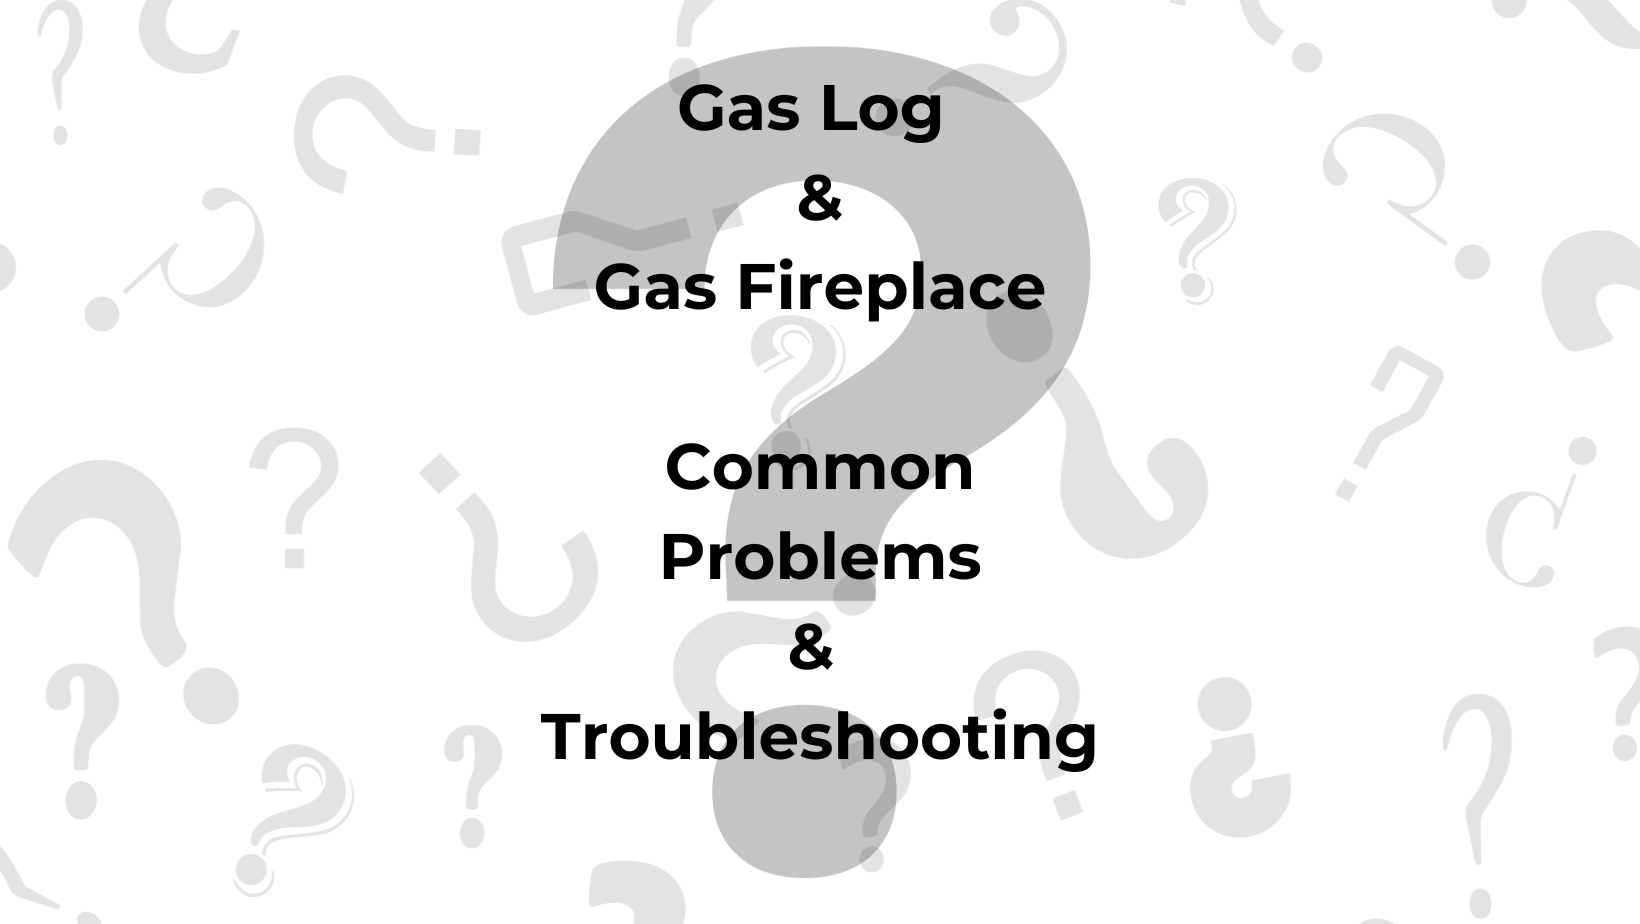 Gas Logs & Fireplaces: A Troubleshooting Guide